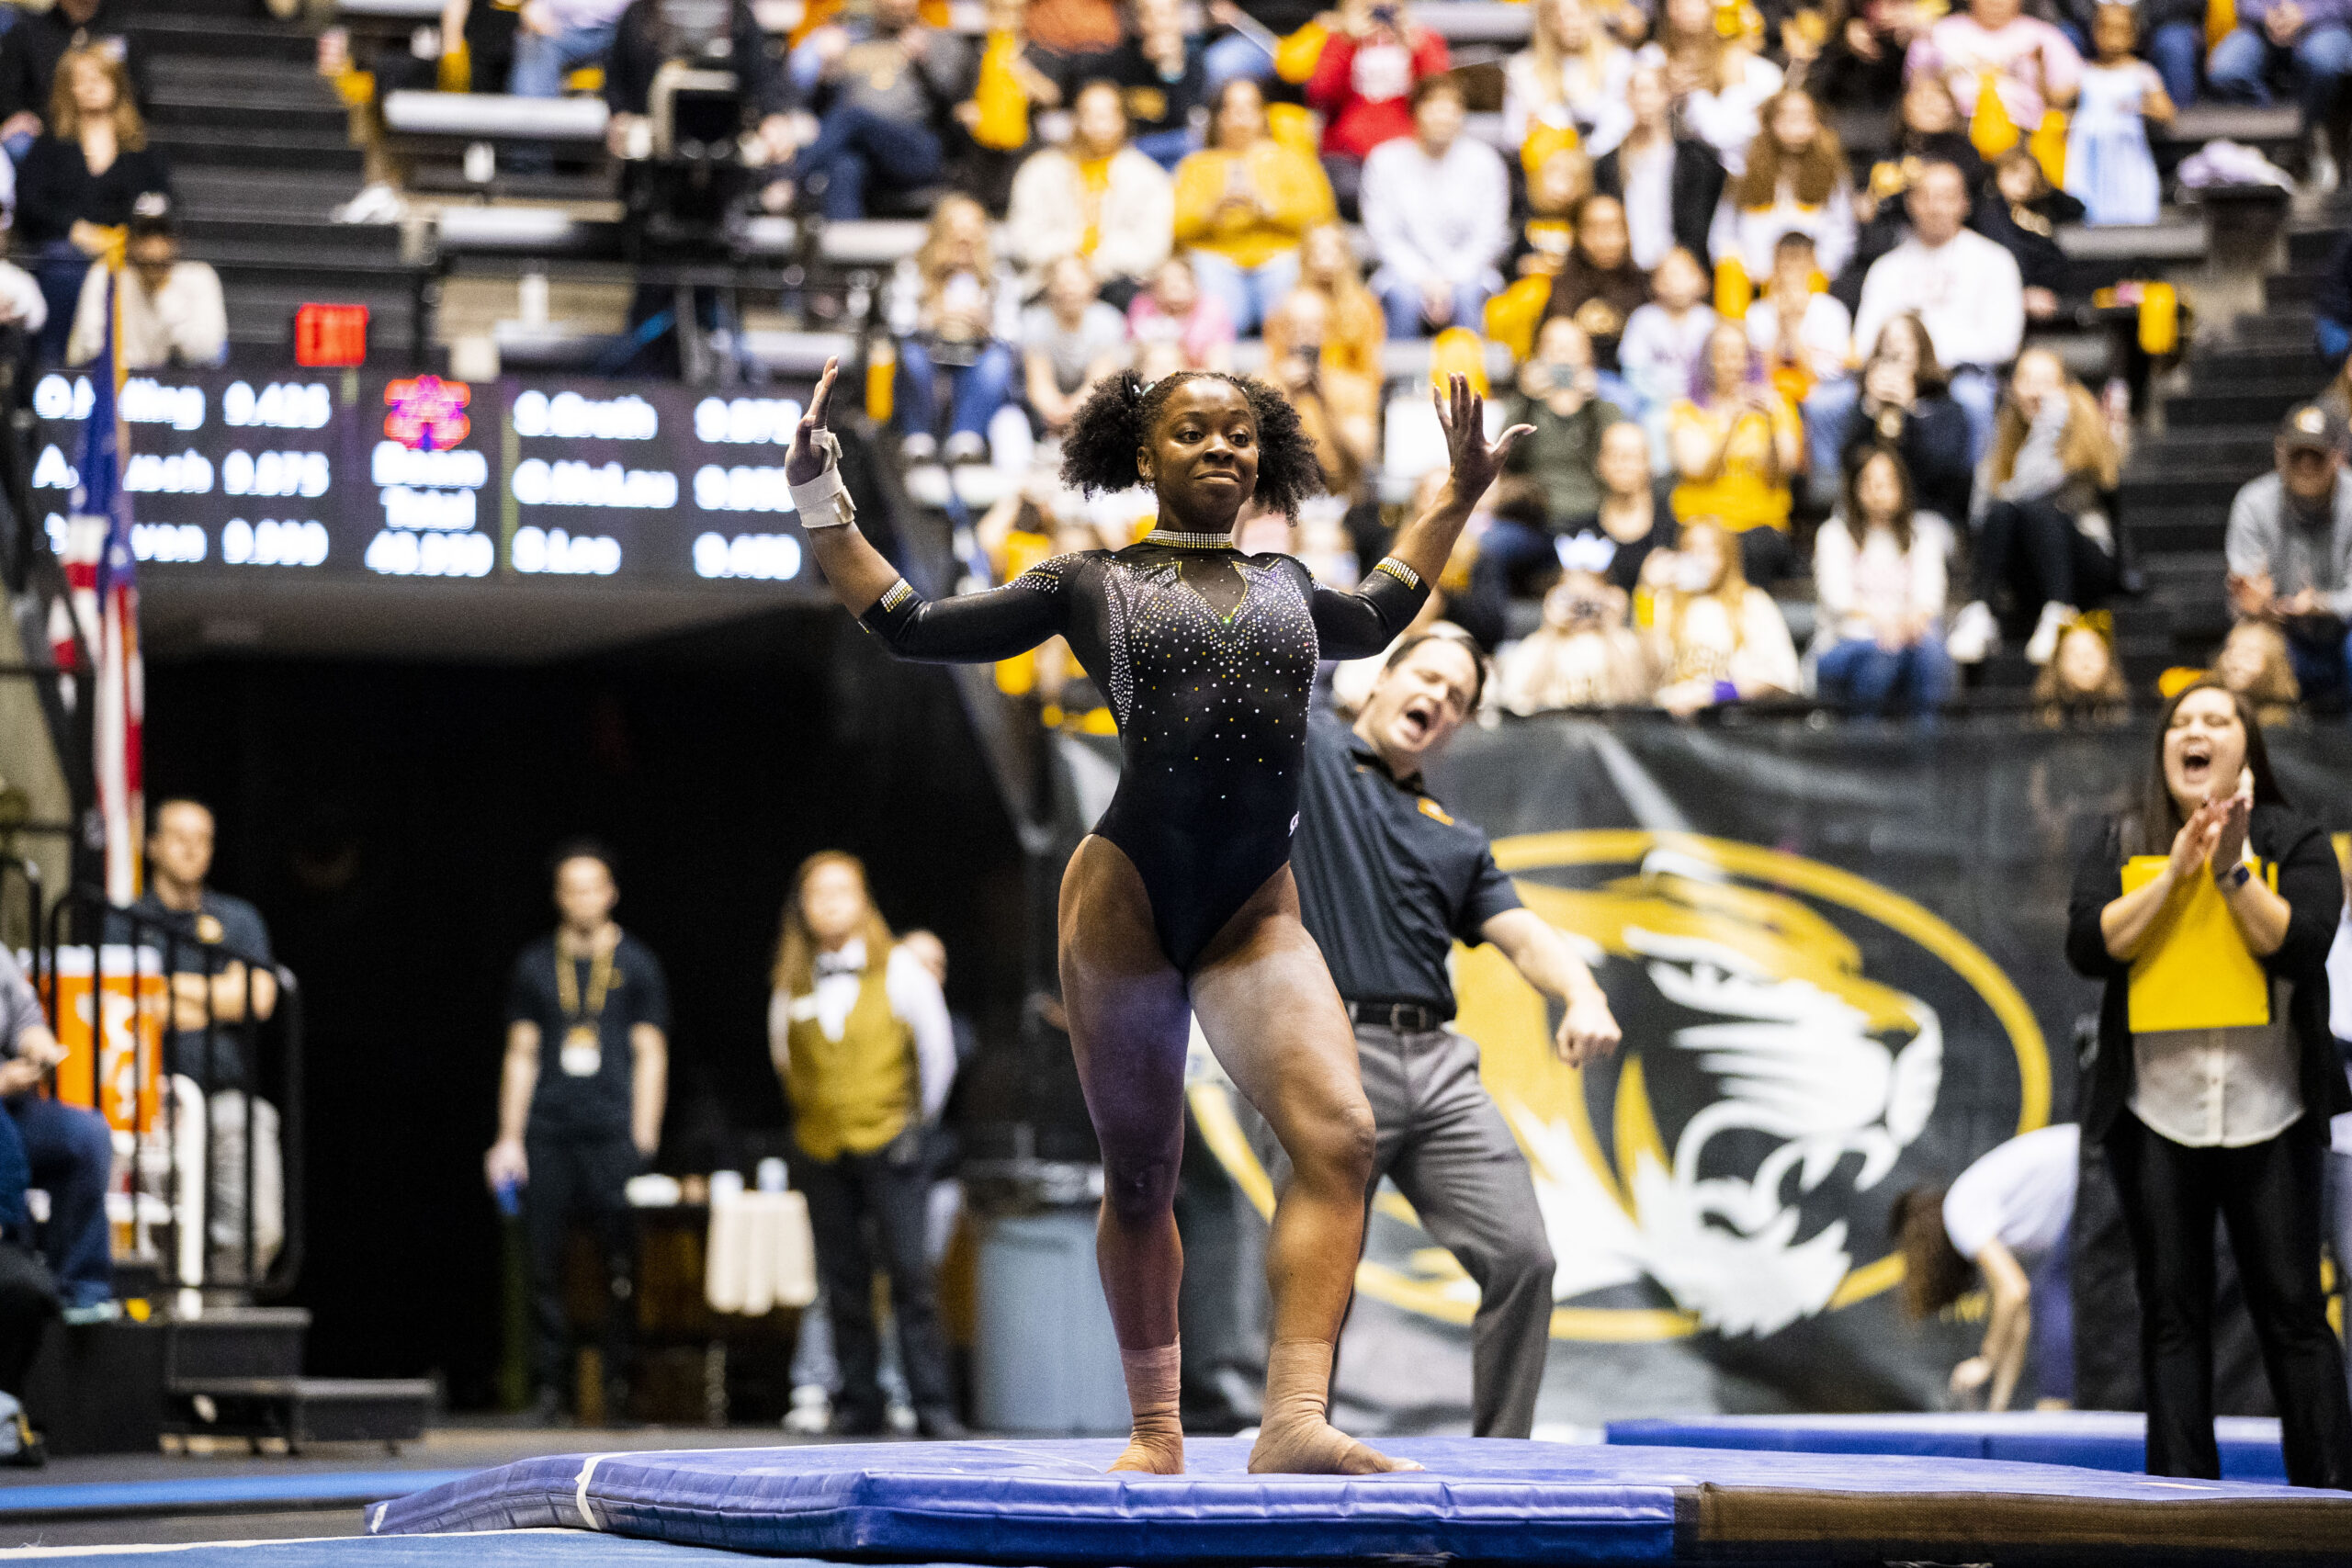 No. 3 Ranked Mizzou Gymnastics Team to Host Florida, Illinois and Lindenwood in Quad Meet on February 16 at Family Arena in St. Charles